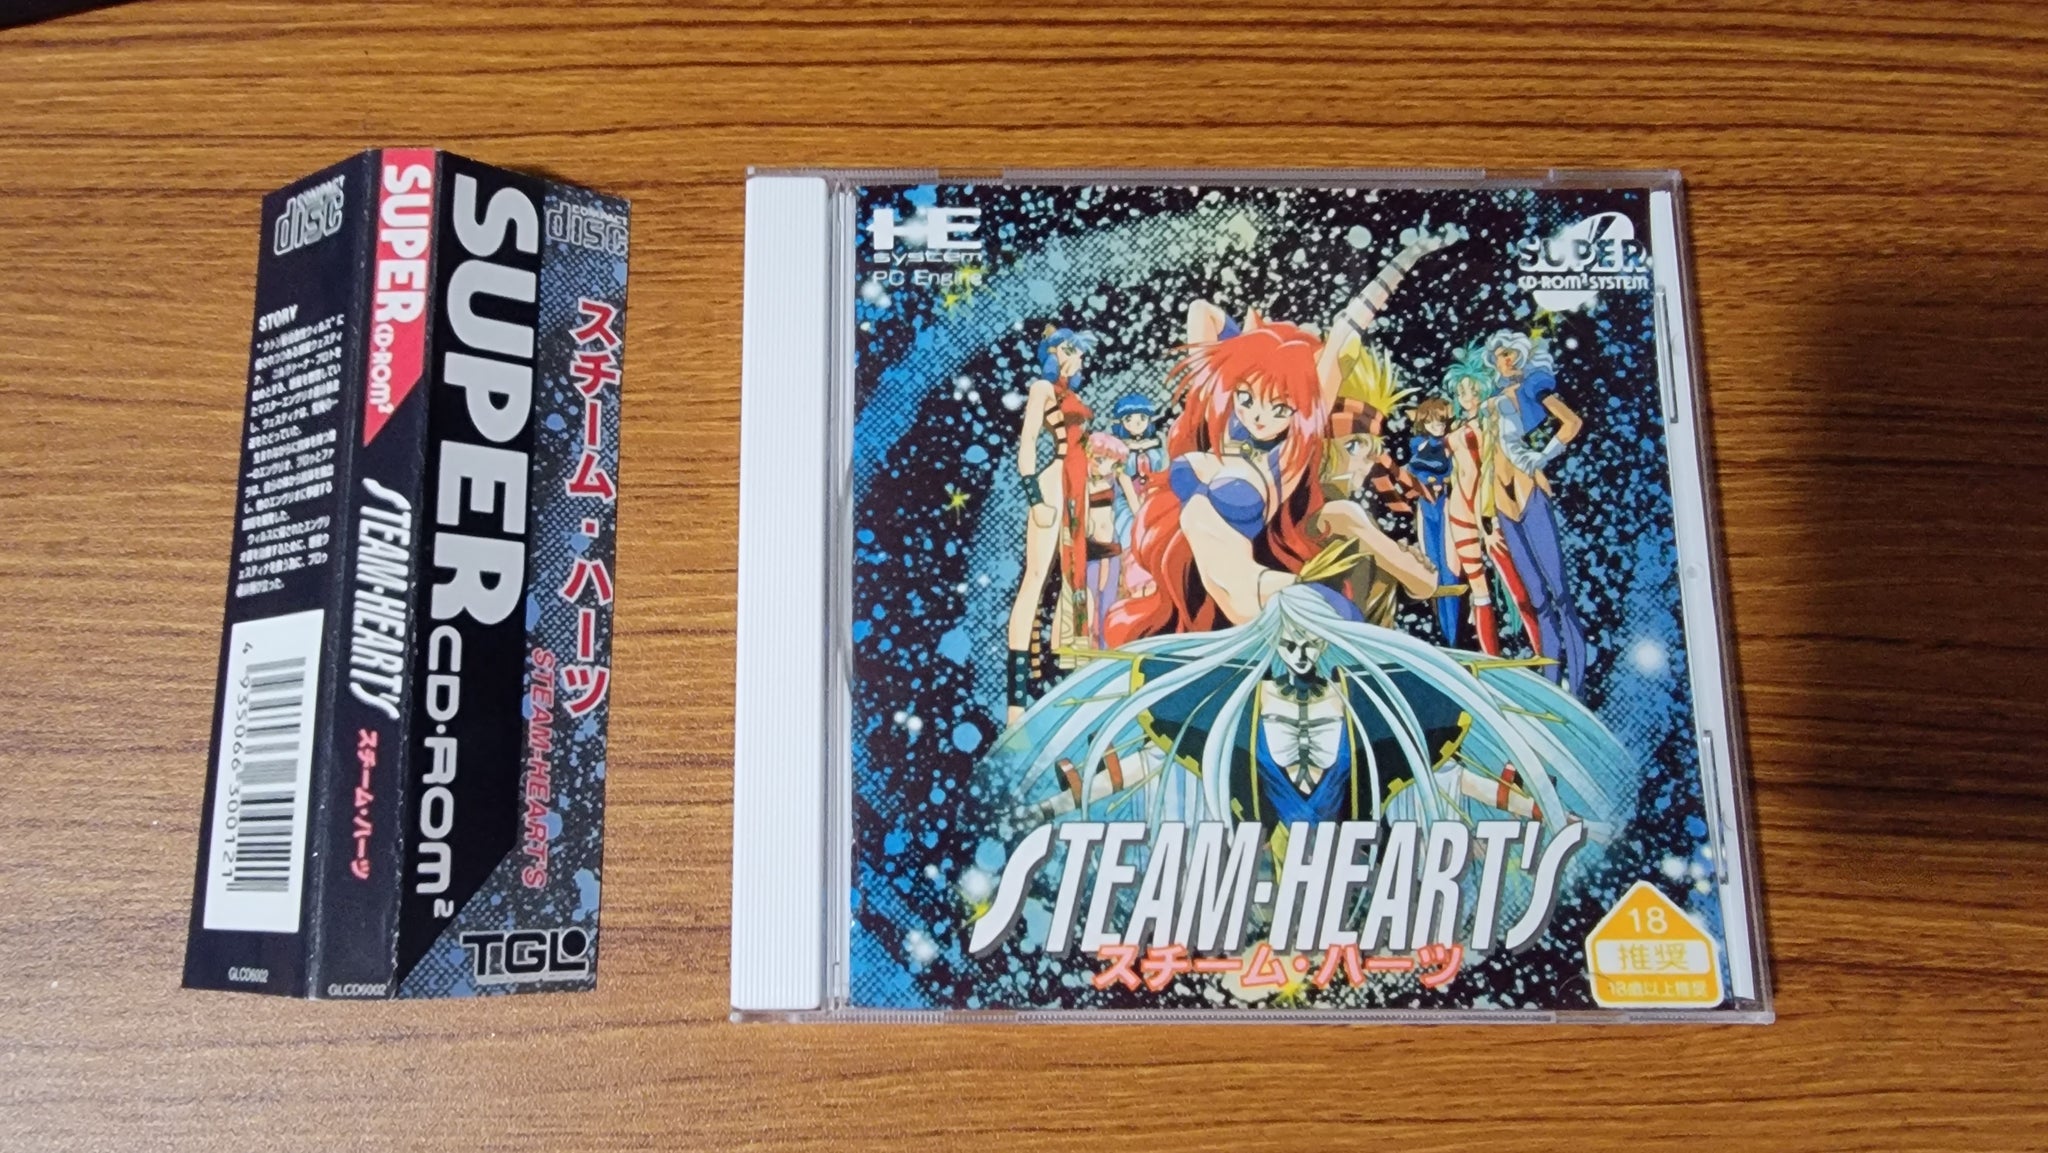 Steam Hearts PCEngine CD Reproduction